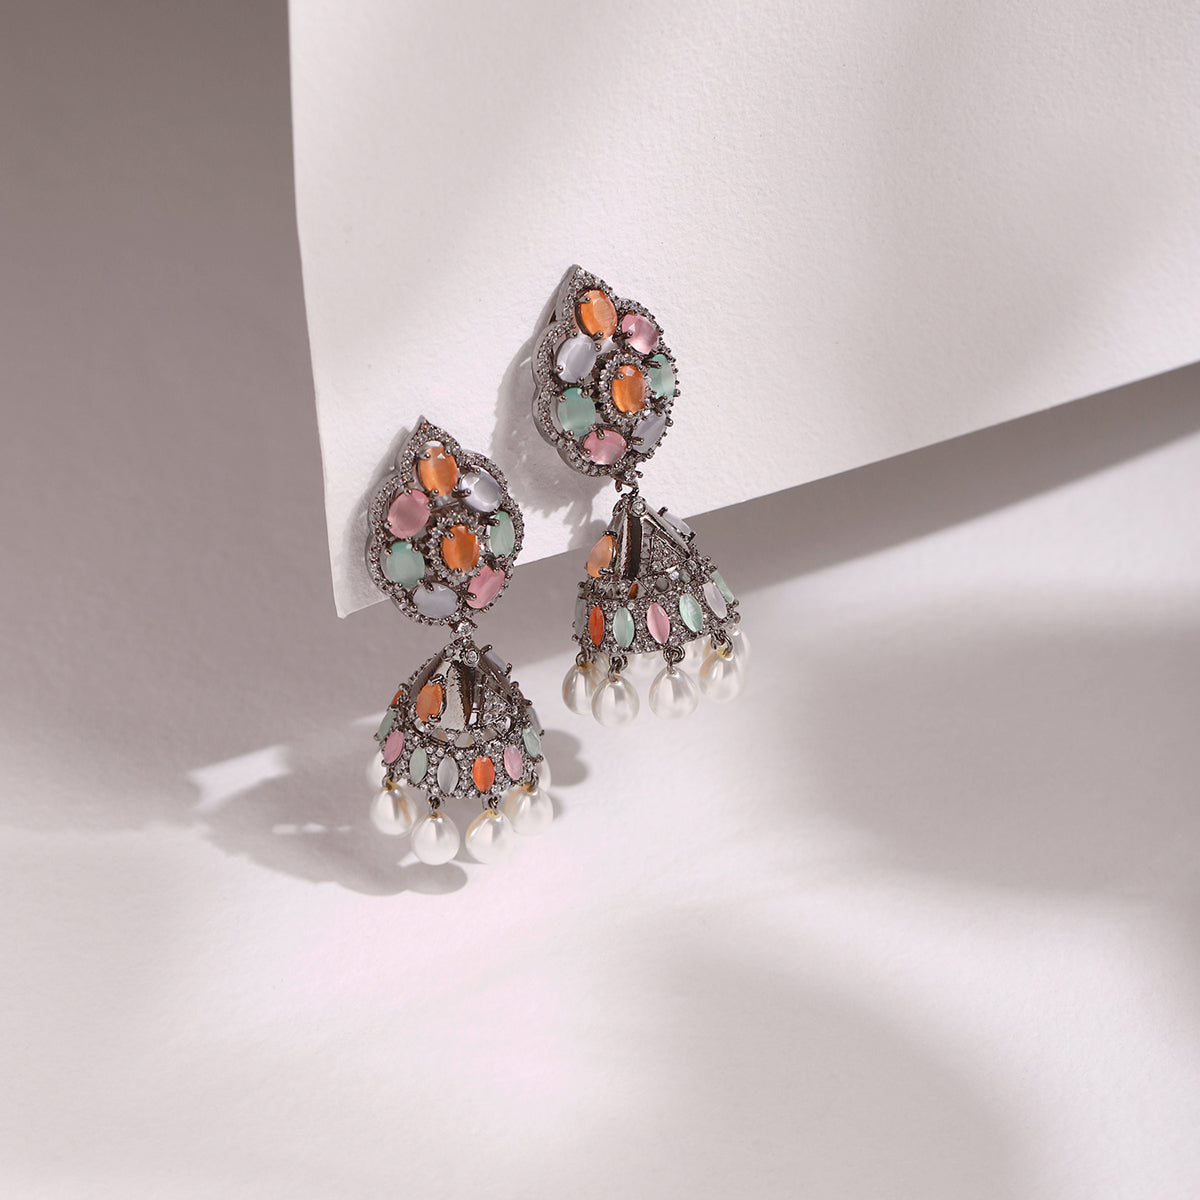 Silver-Plated Contemporary Jhumkas Earrings